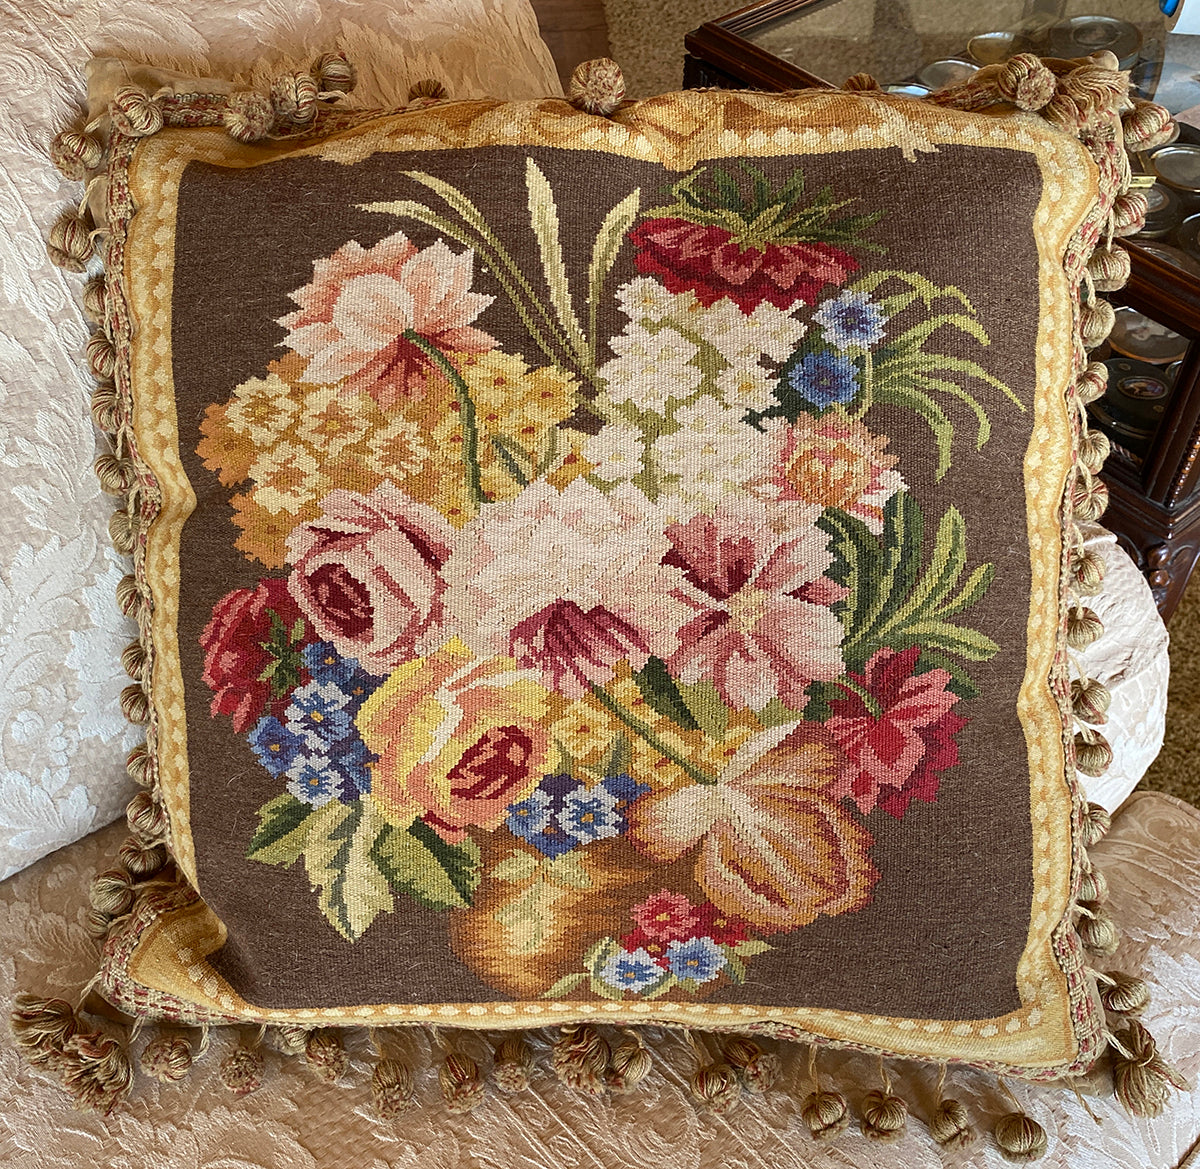 Superb 22" Square French Aubusson Tapestry Panel Vintage Pillow, Ball Fringe Passementerie